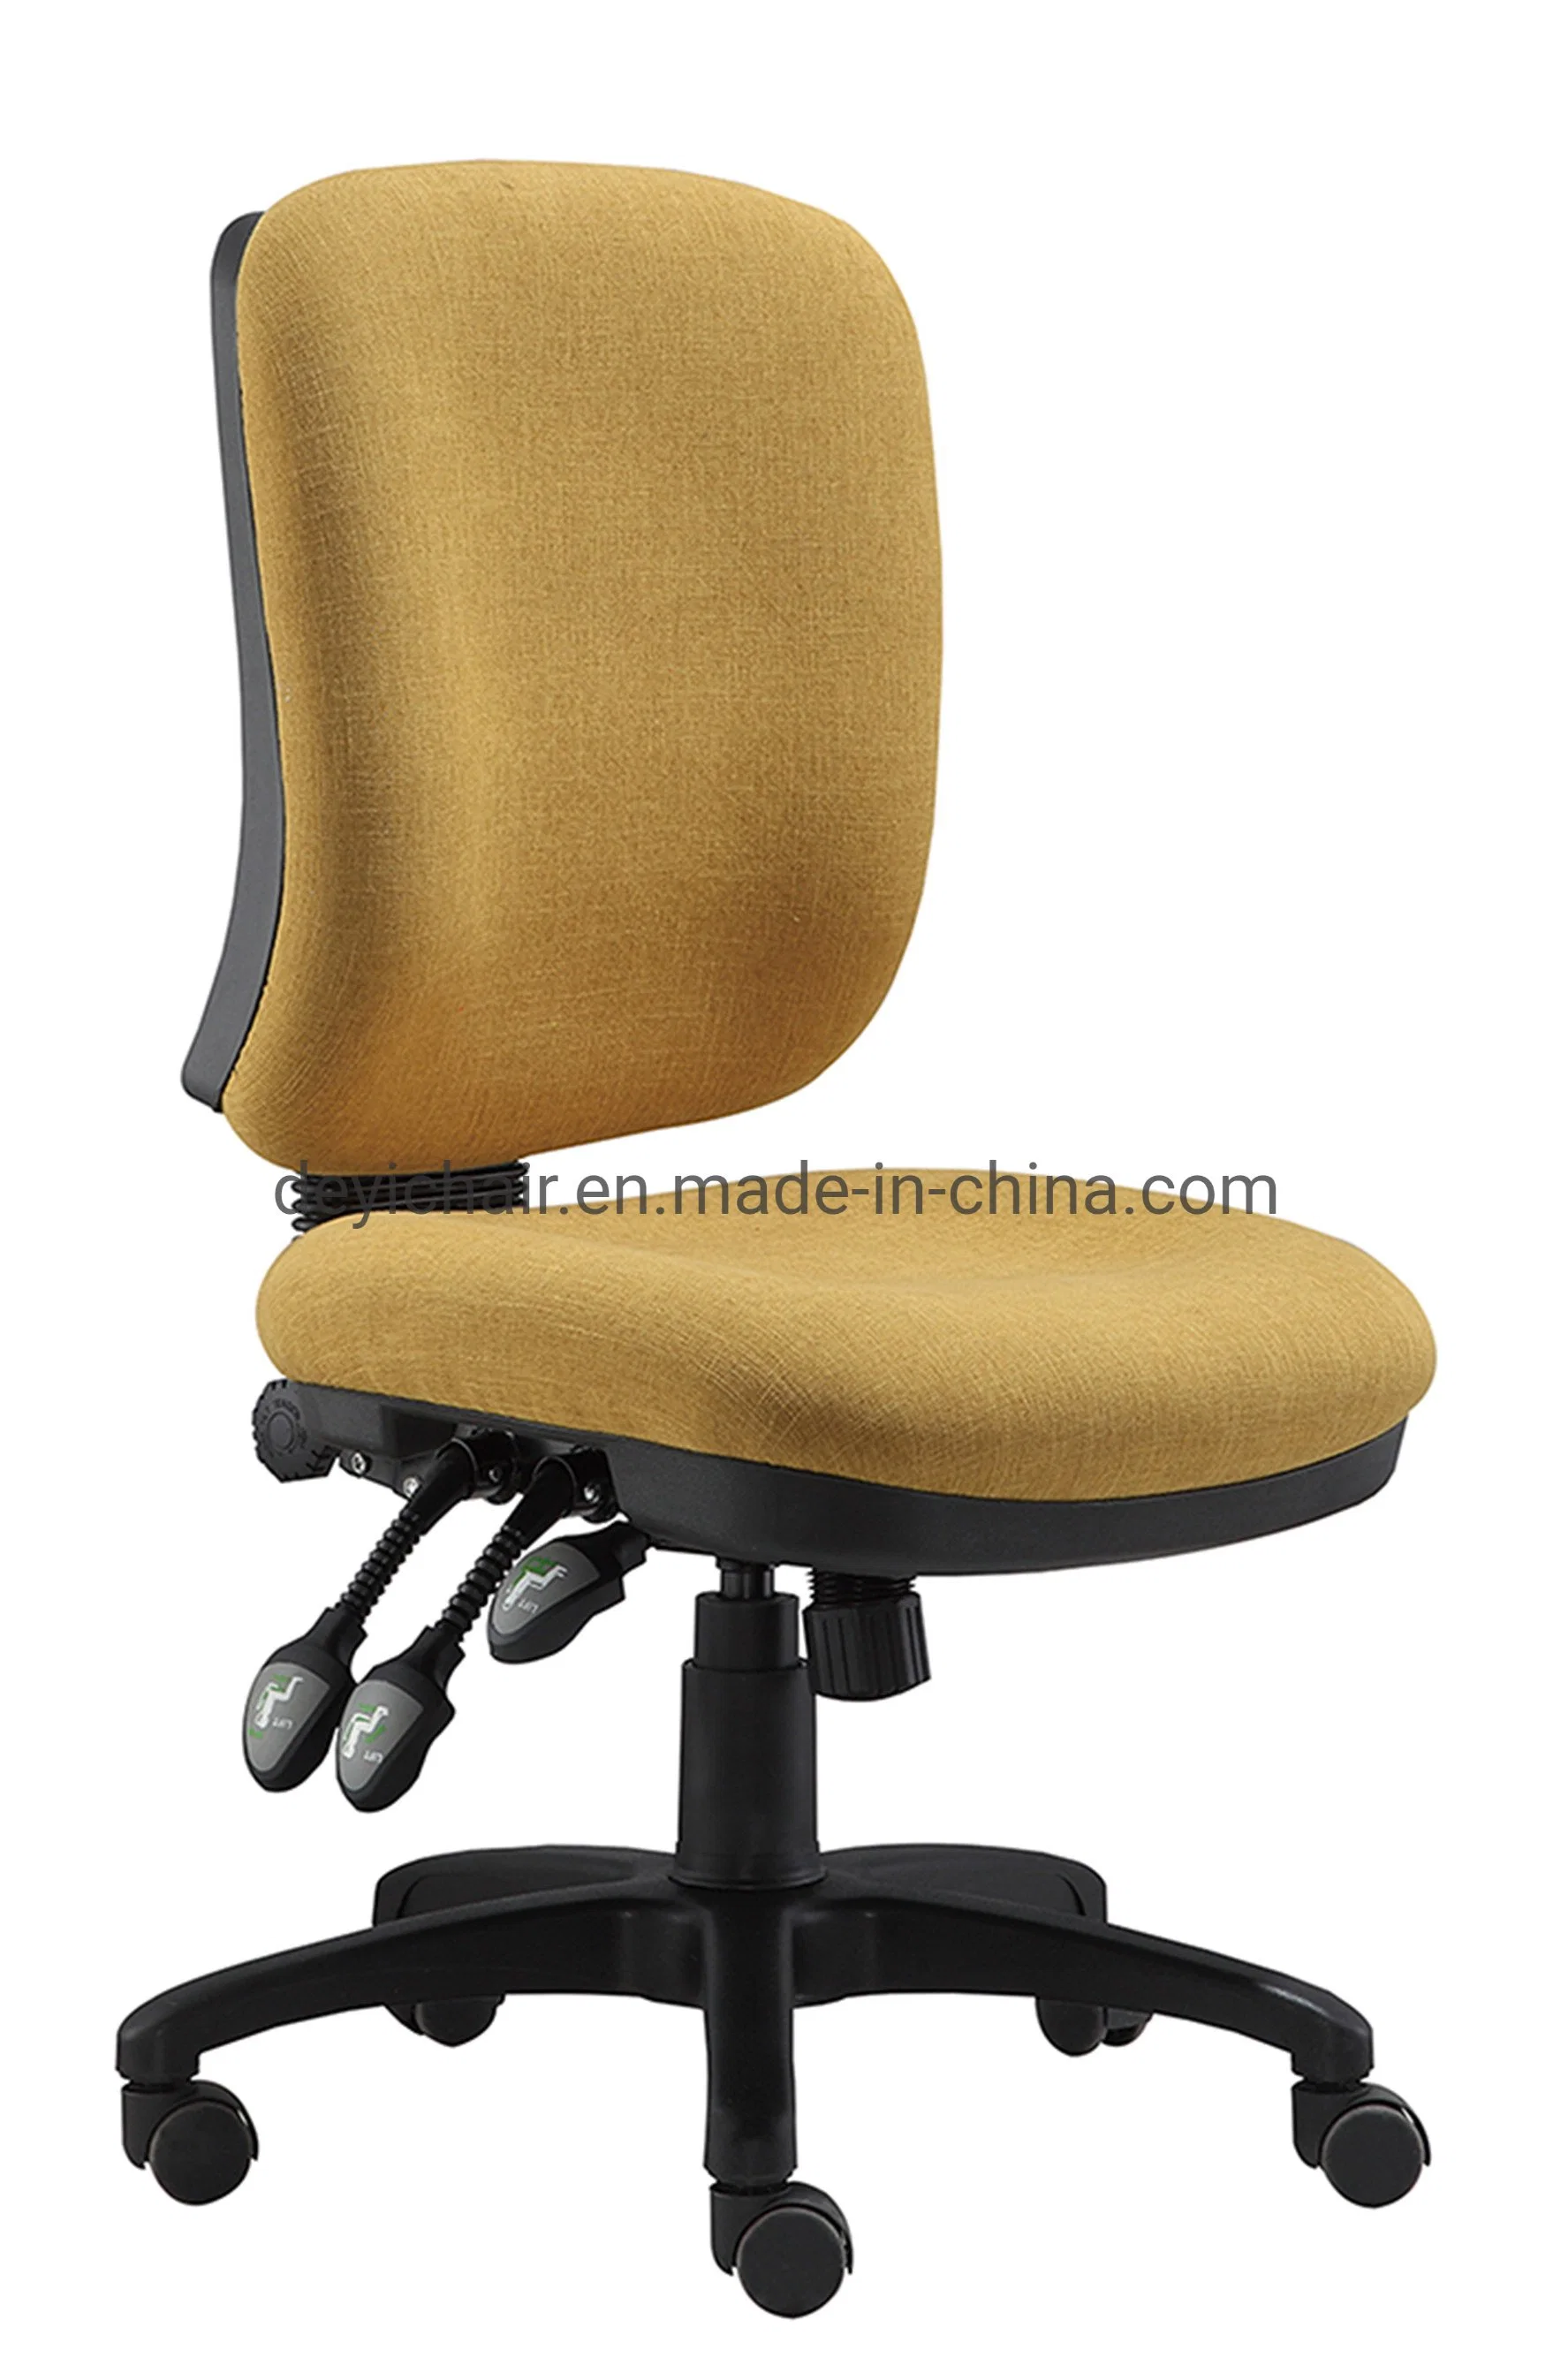 Back and Seat Angle Adjustment Functional Mechanism Low Back Fabric Upholstery Computer Office Chair